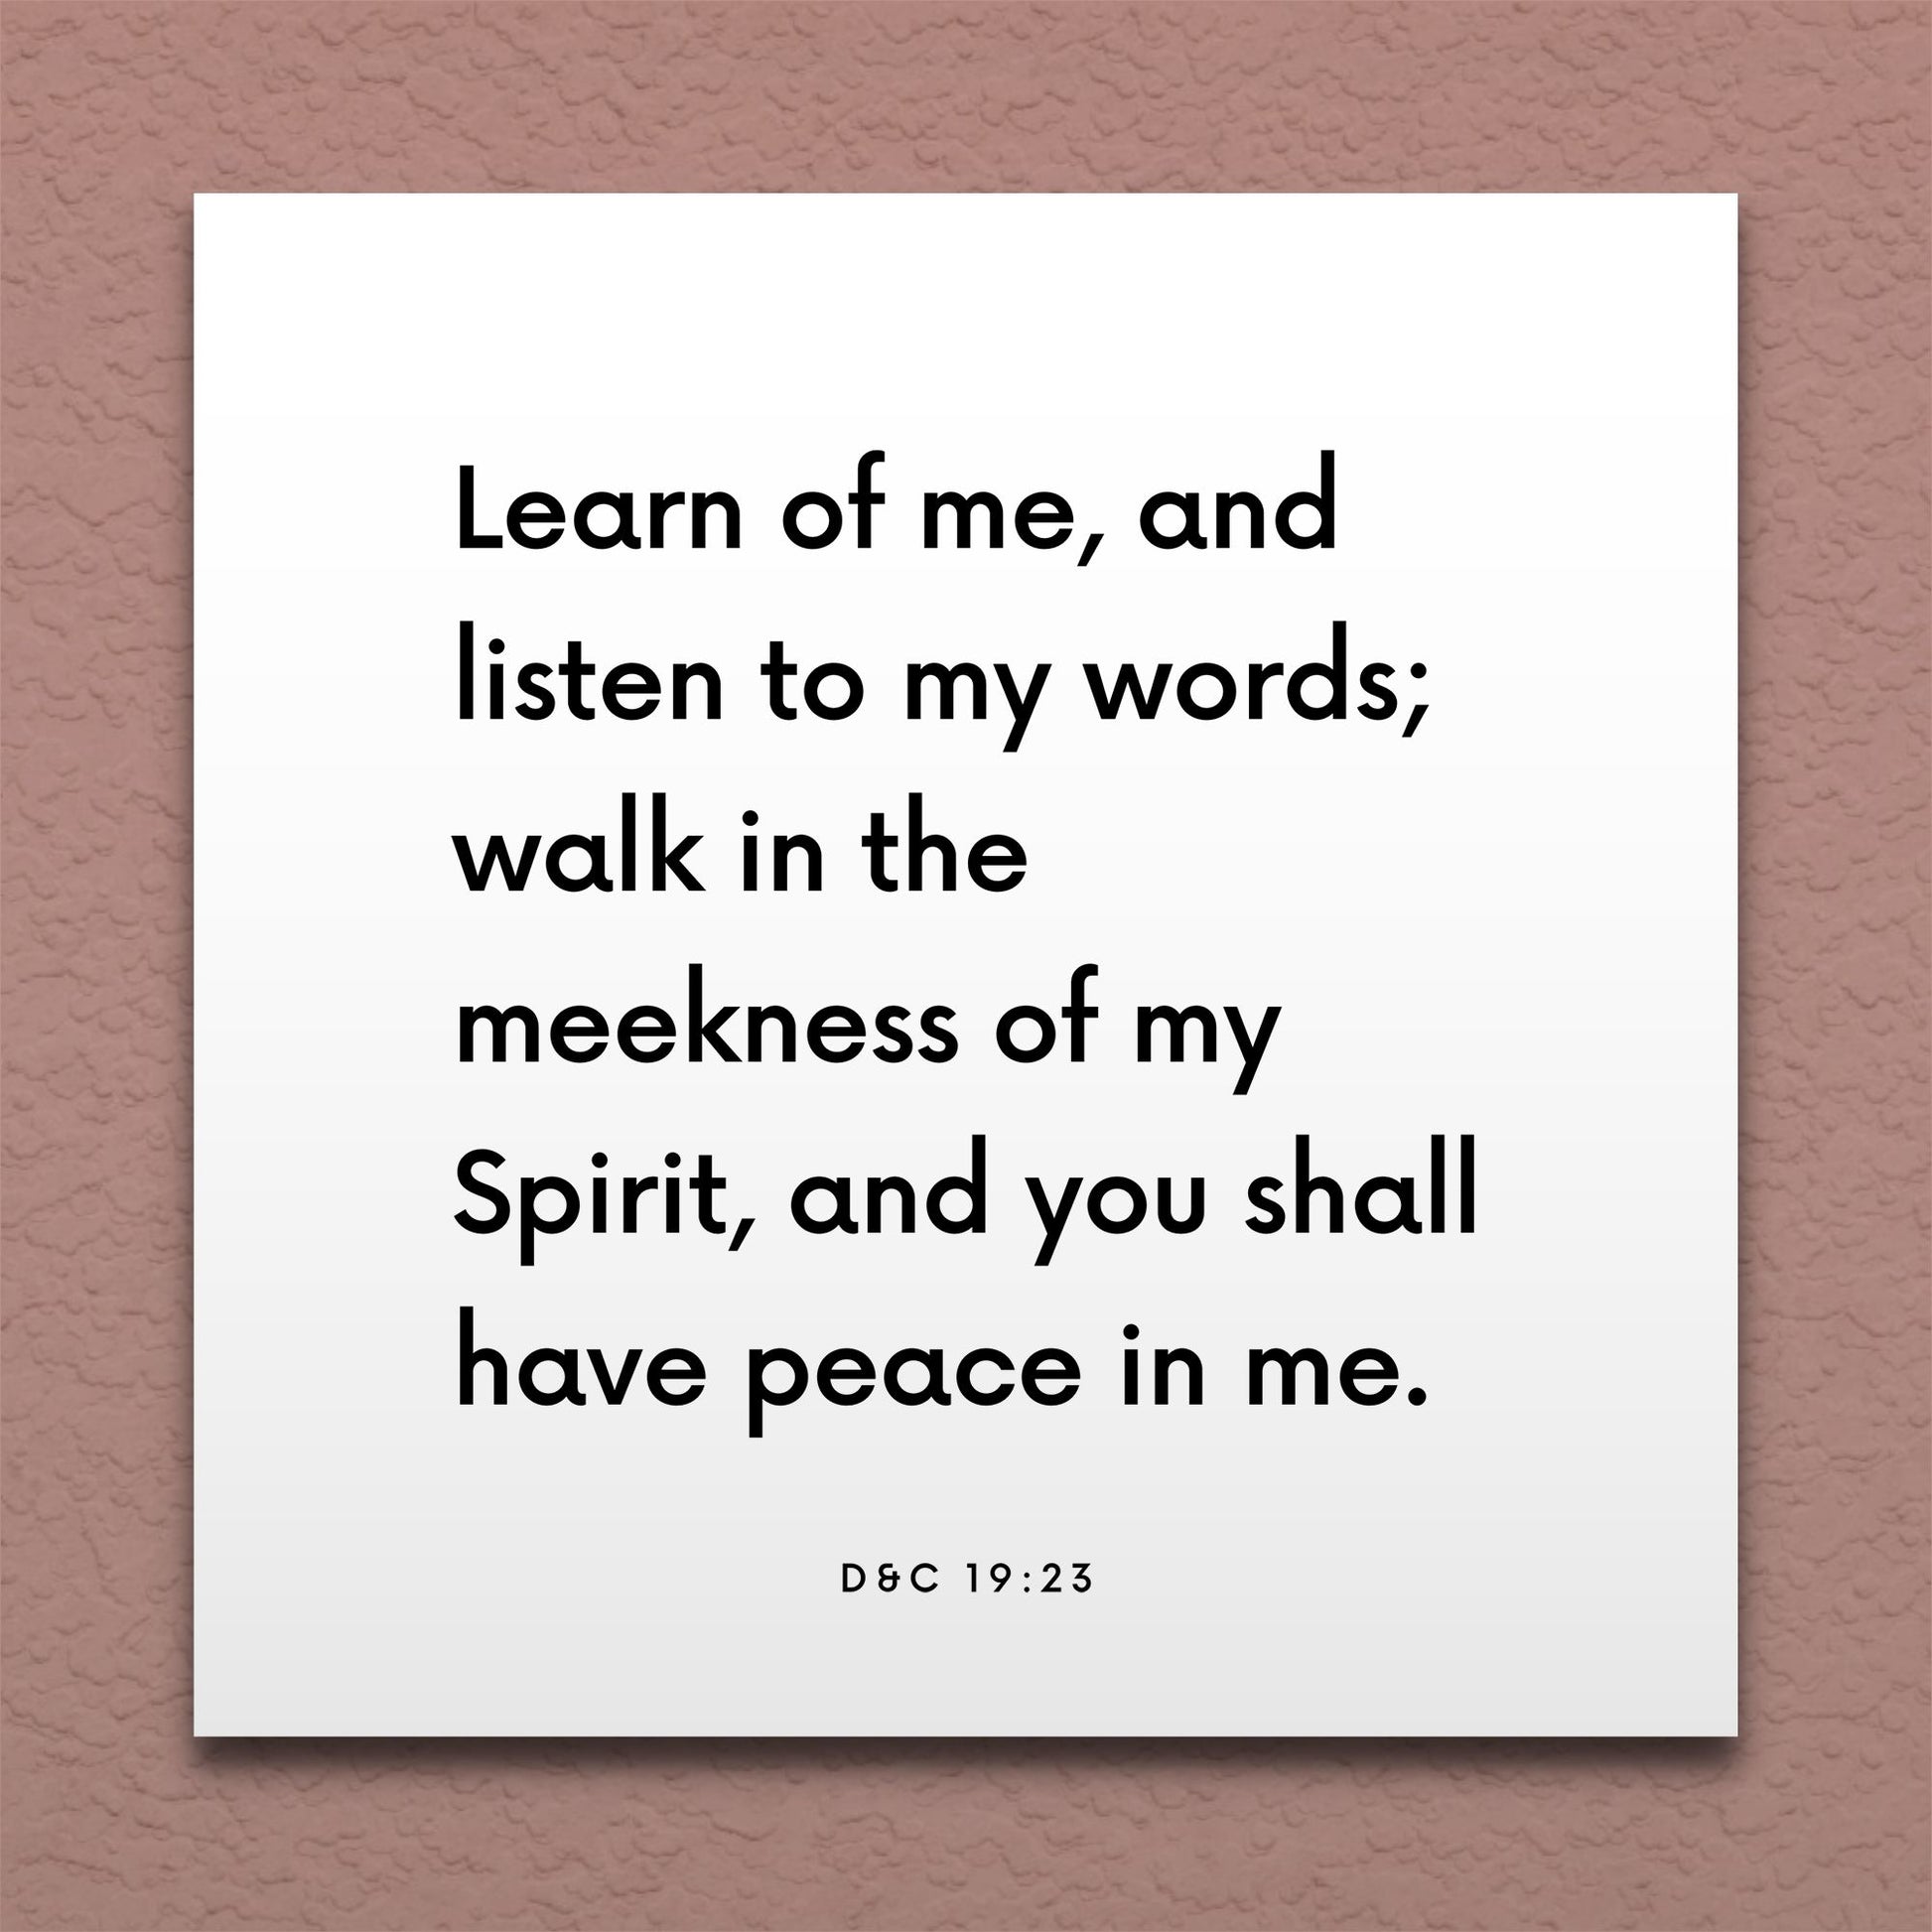 Wall-mounted scripture tile for D&C 19:23 - "Learn of me, and listen to my words"